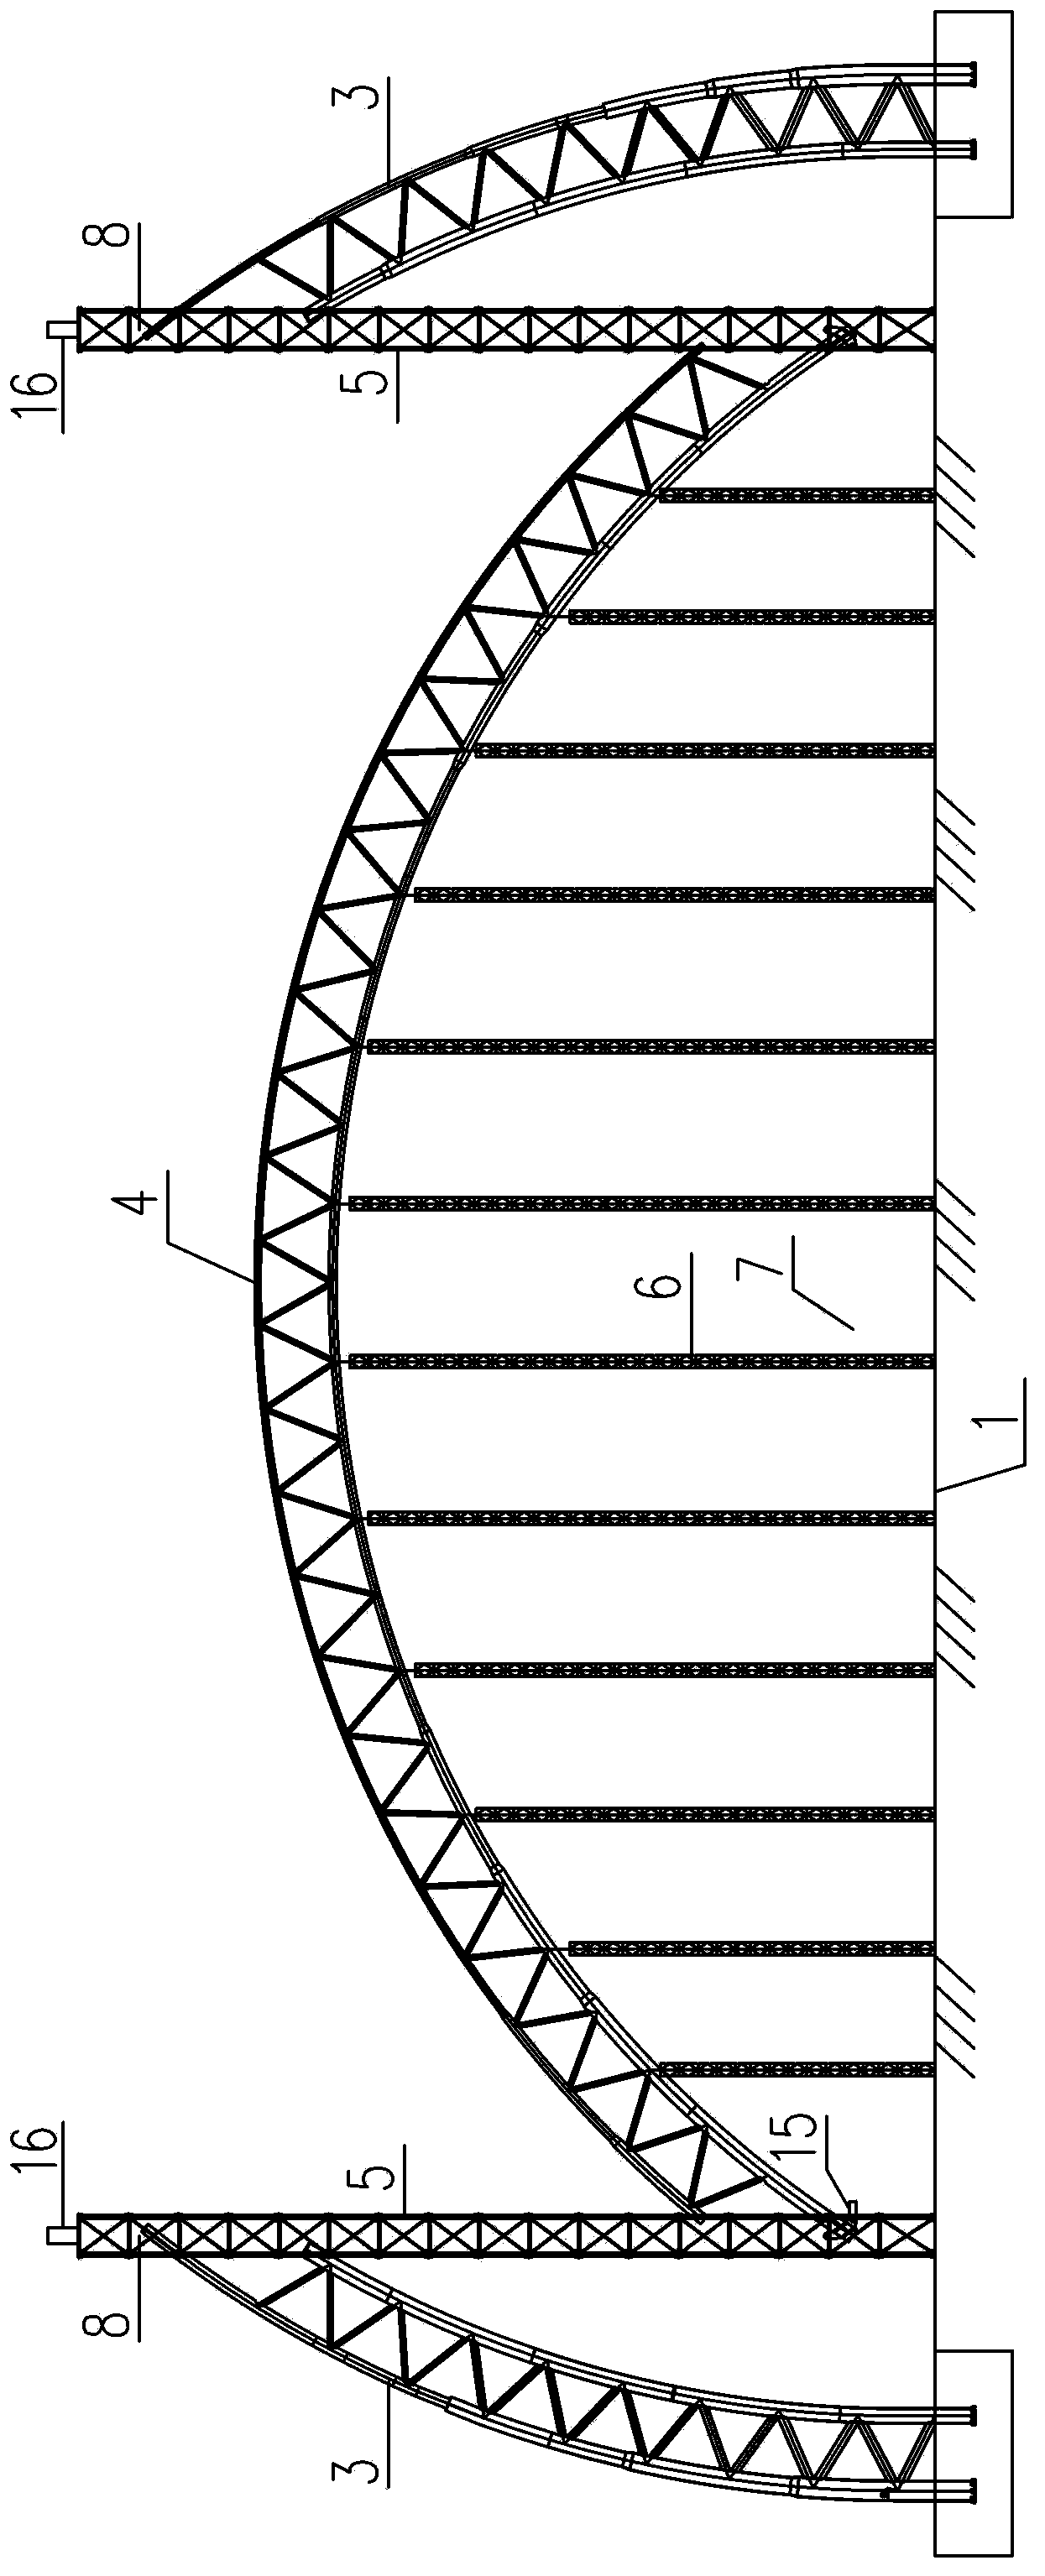 Construction method for lifting arch structure in zero-deformation state